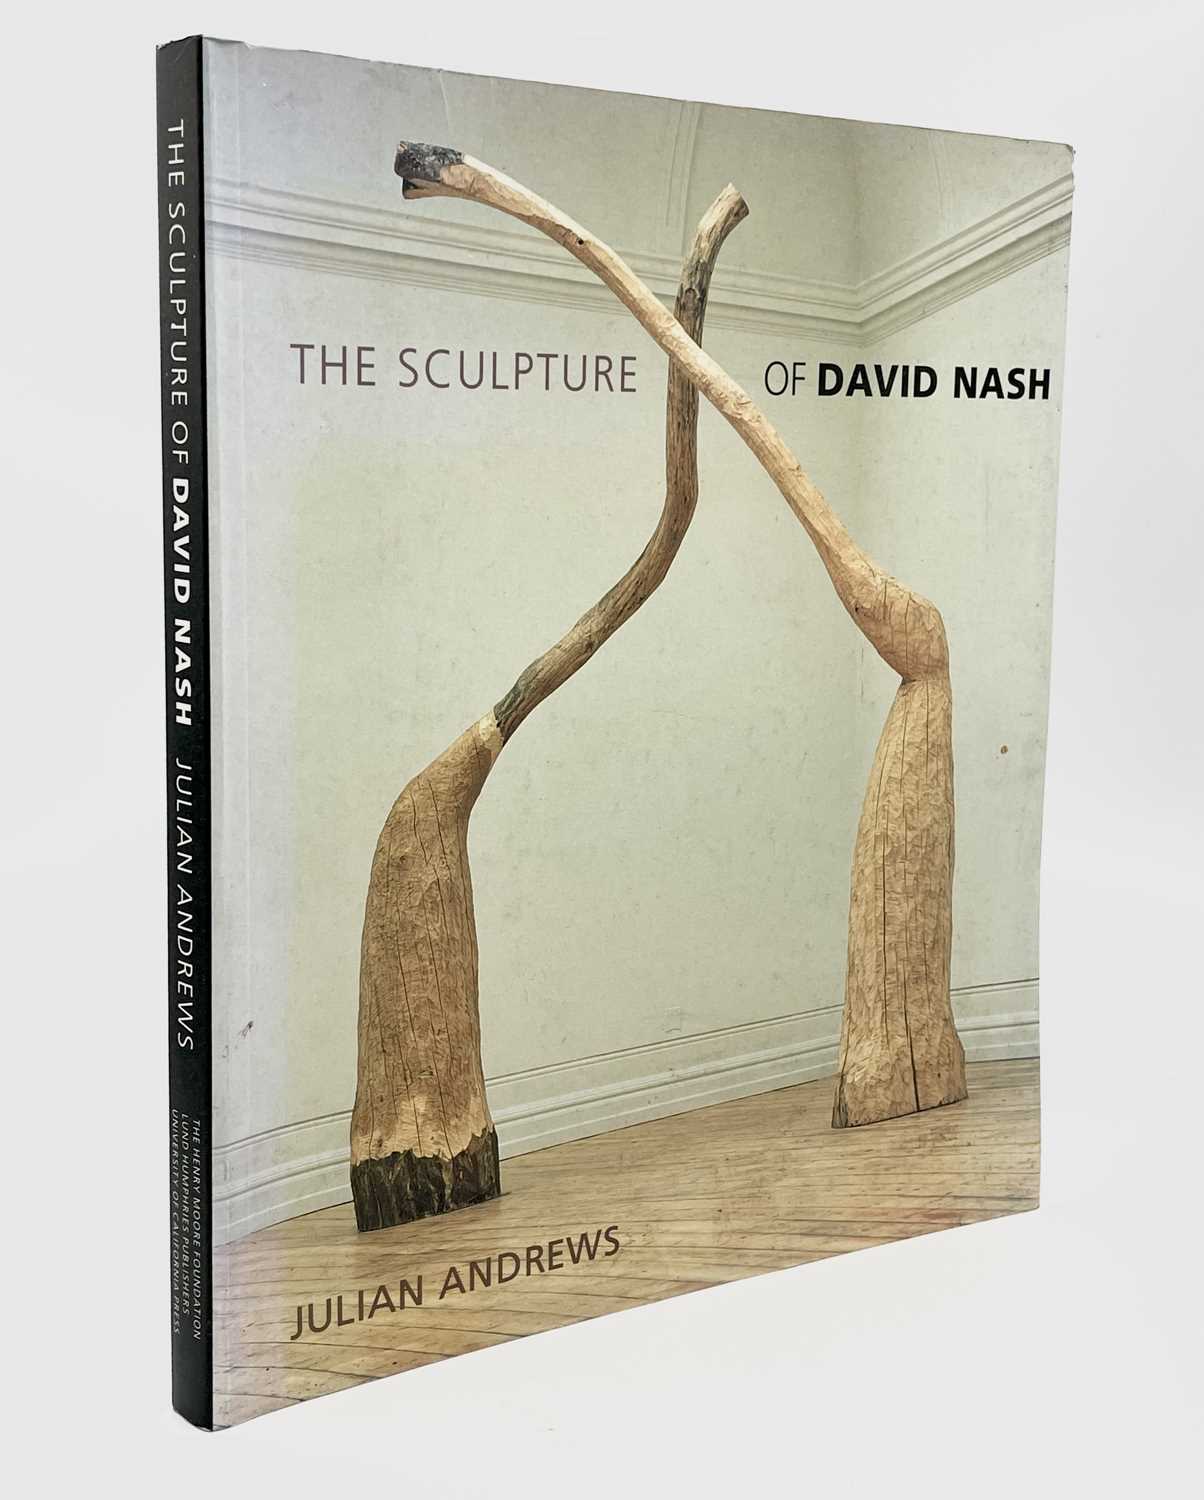 Julian ANDREWS. 'The sculpture of David Nash'. The Henry Moore Foundation, 1999